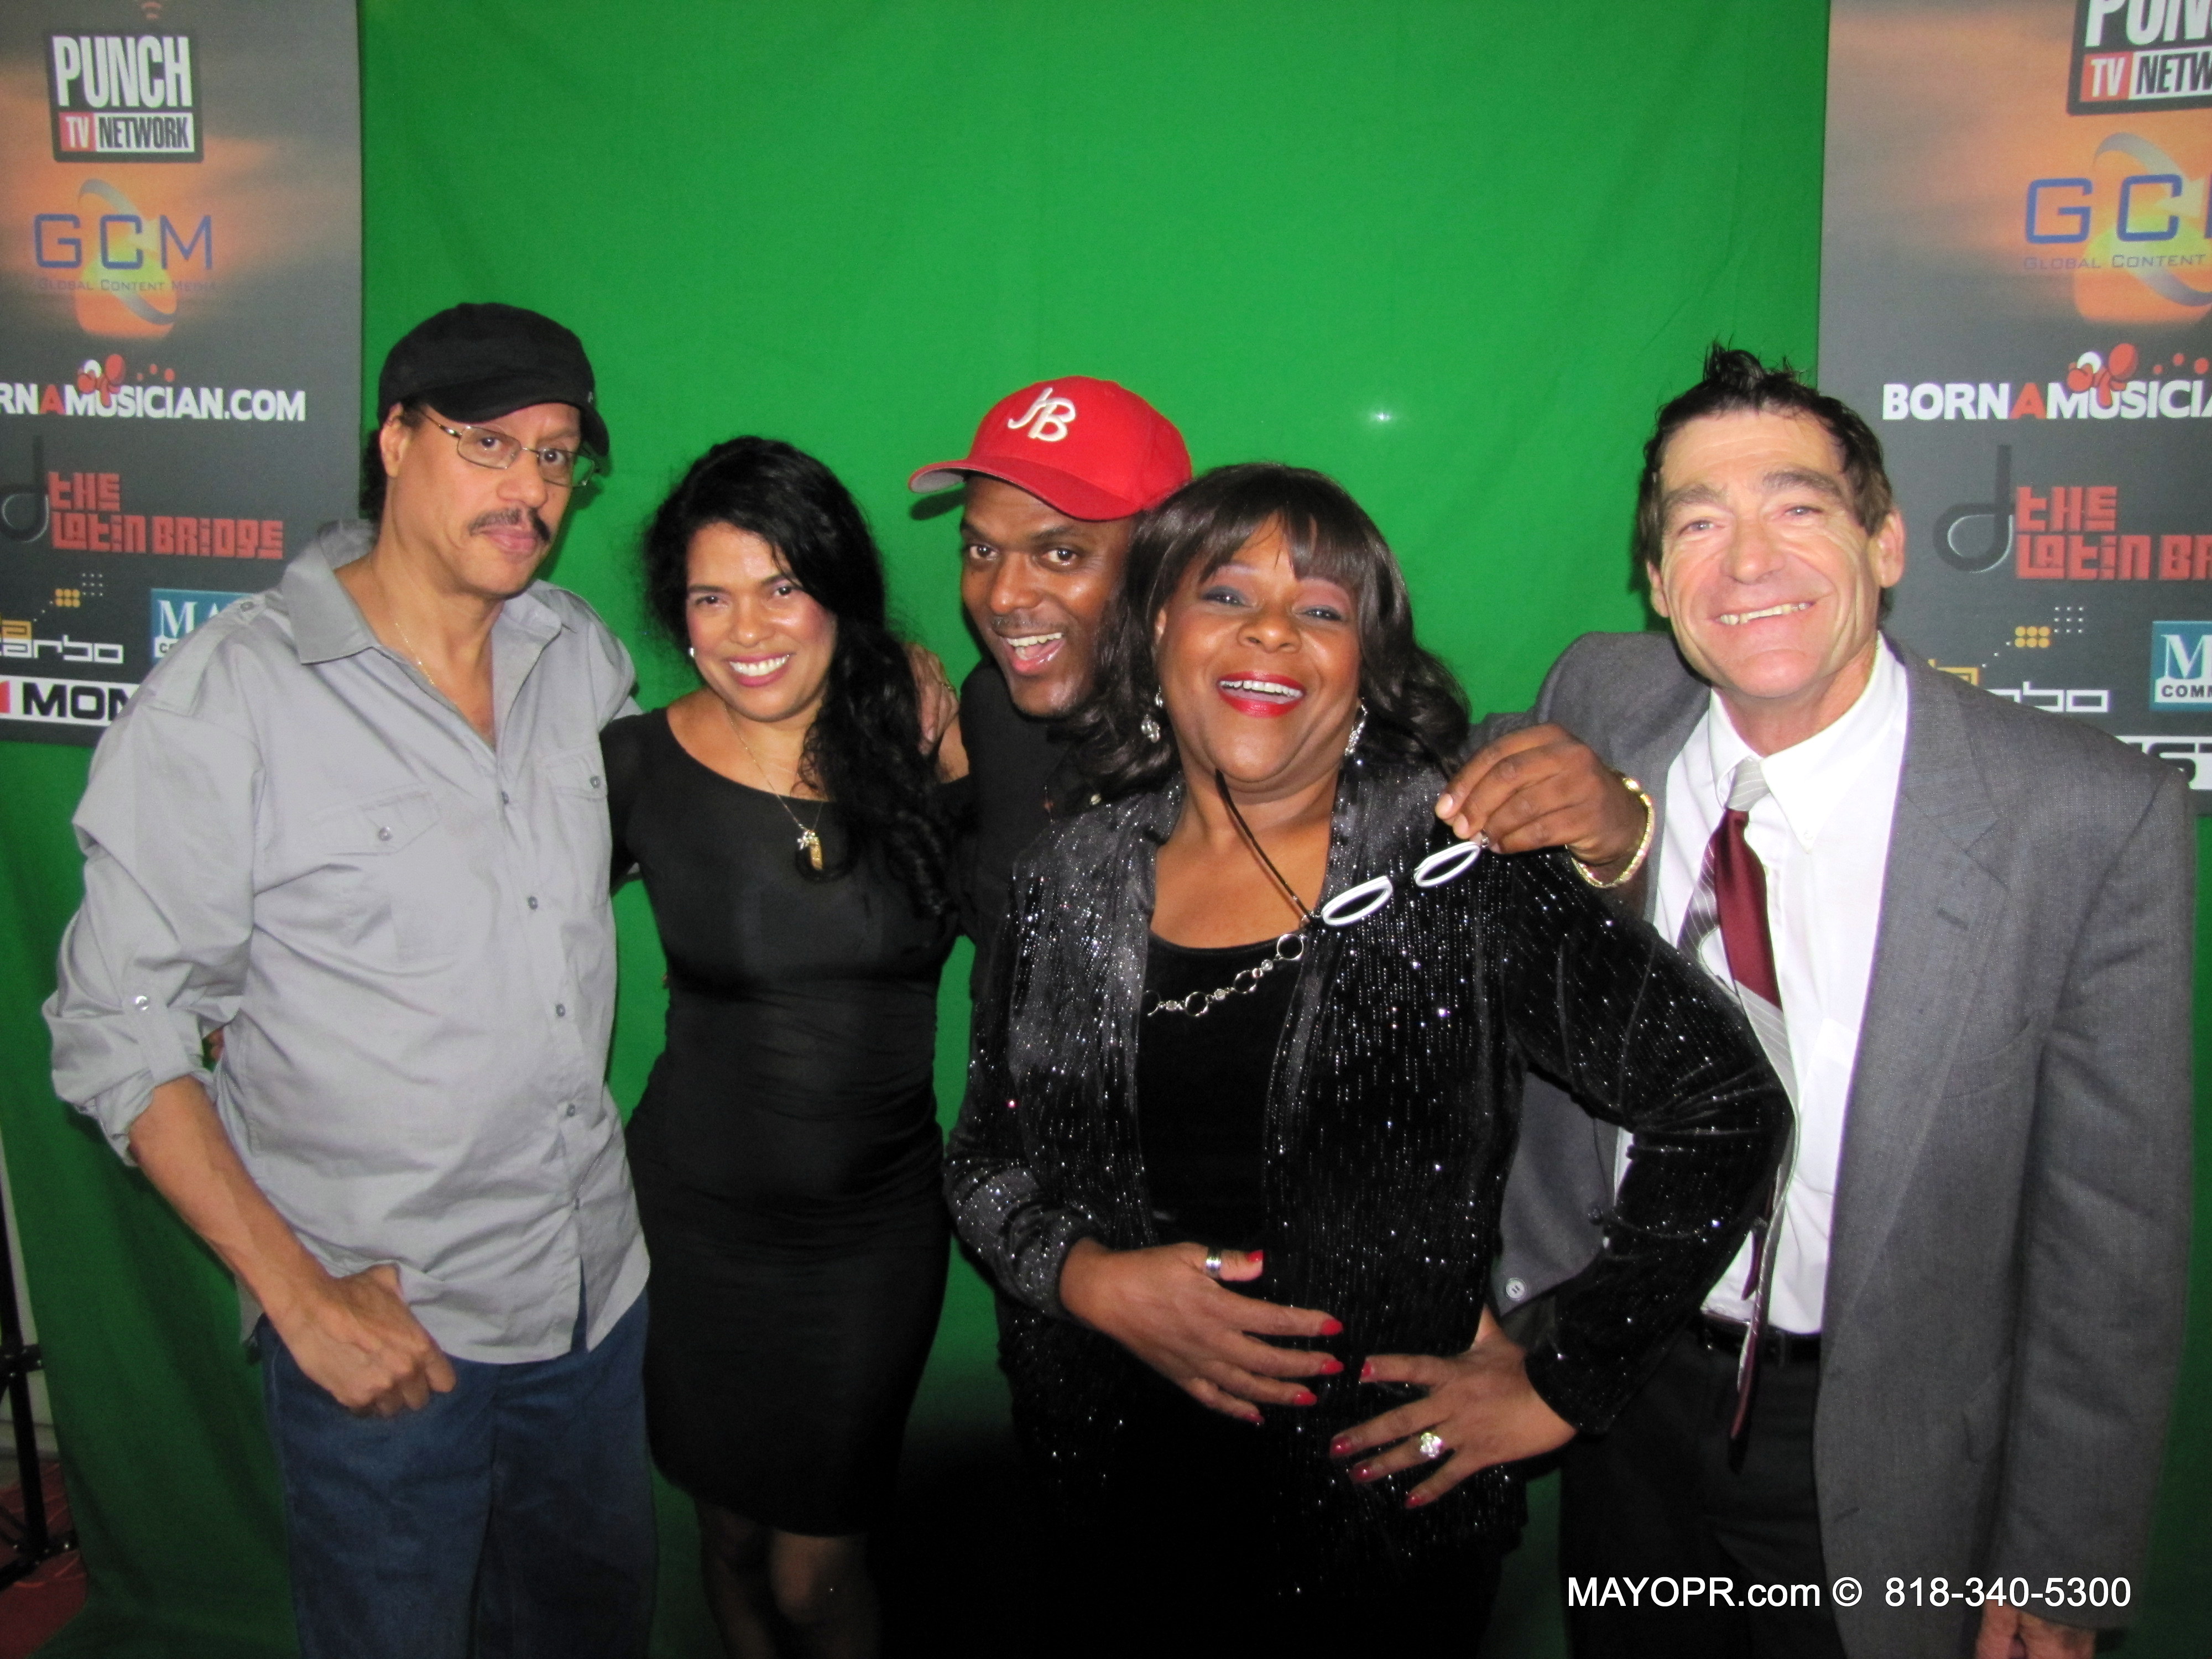 Earth, Wind & Fire's former keyboardist Larry Dunn, Mrs. Dunn, Jon Barnes, MOTHERLOVE and Buddy Princeton on the red carpet at the Catalina Jazz Club.